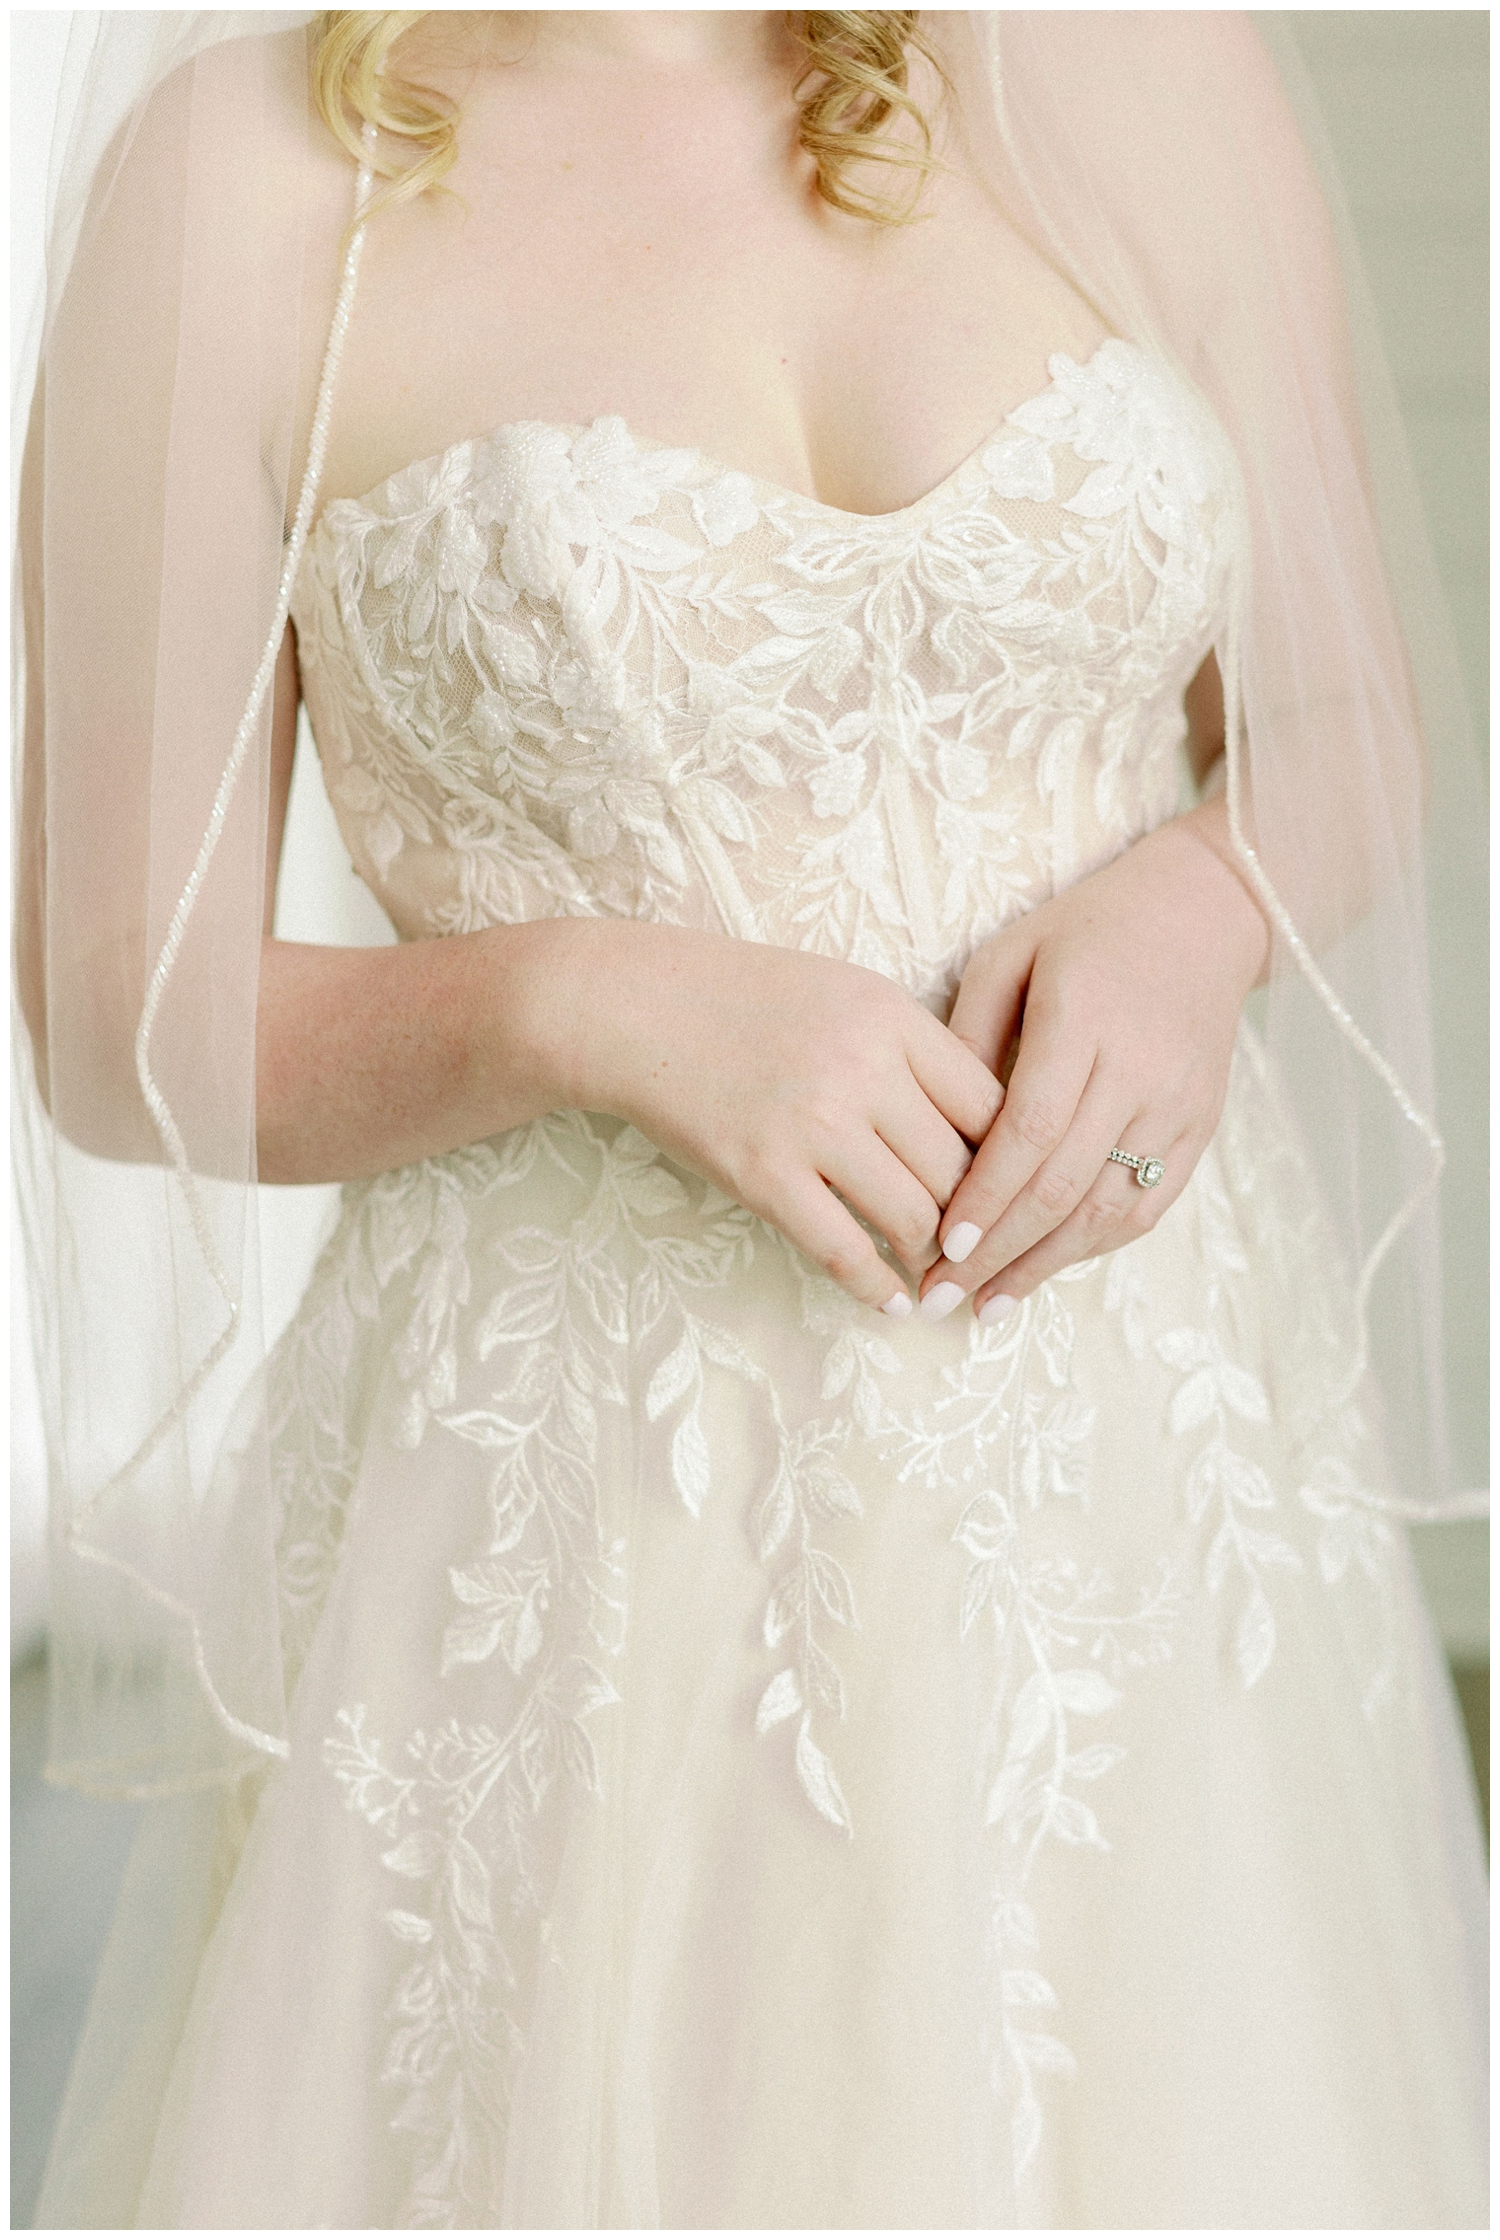 close up of brides hand at her waist with wedding gown and veil